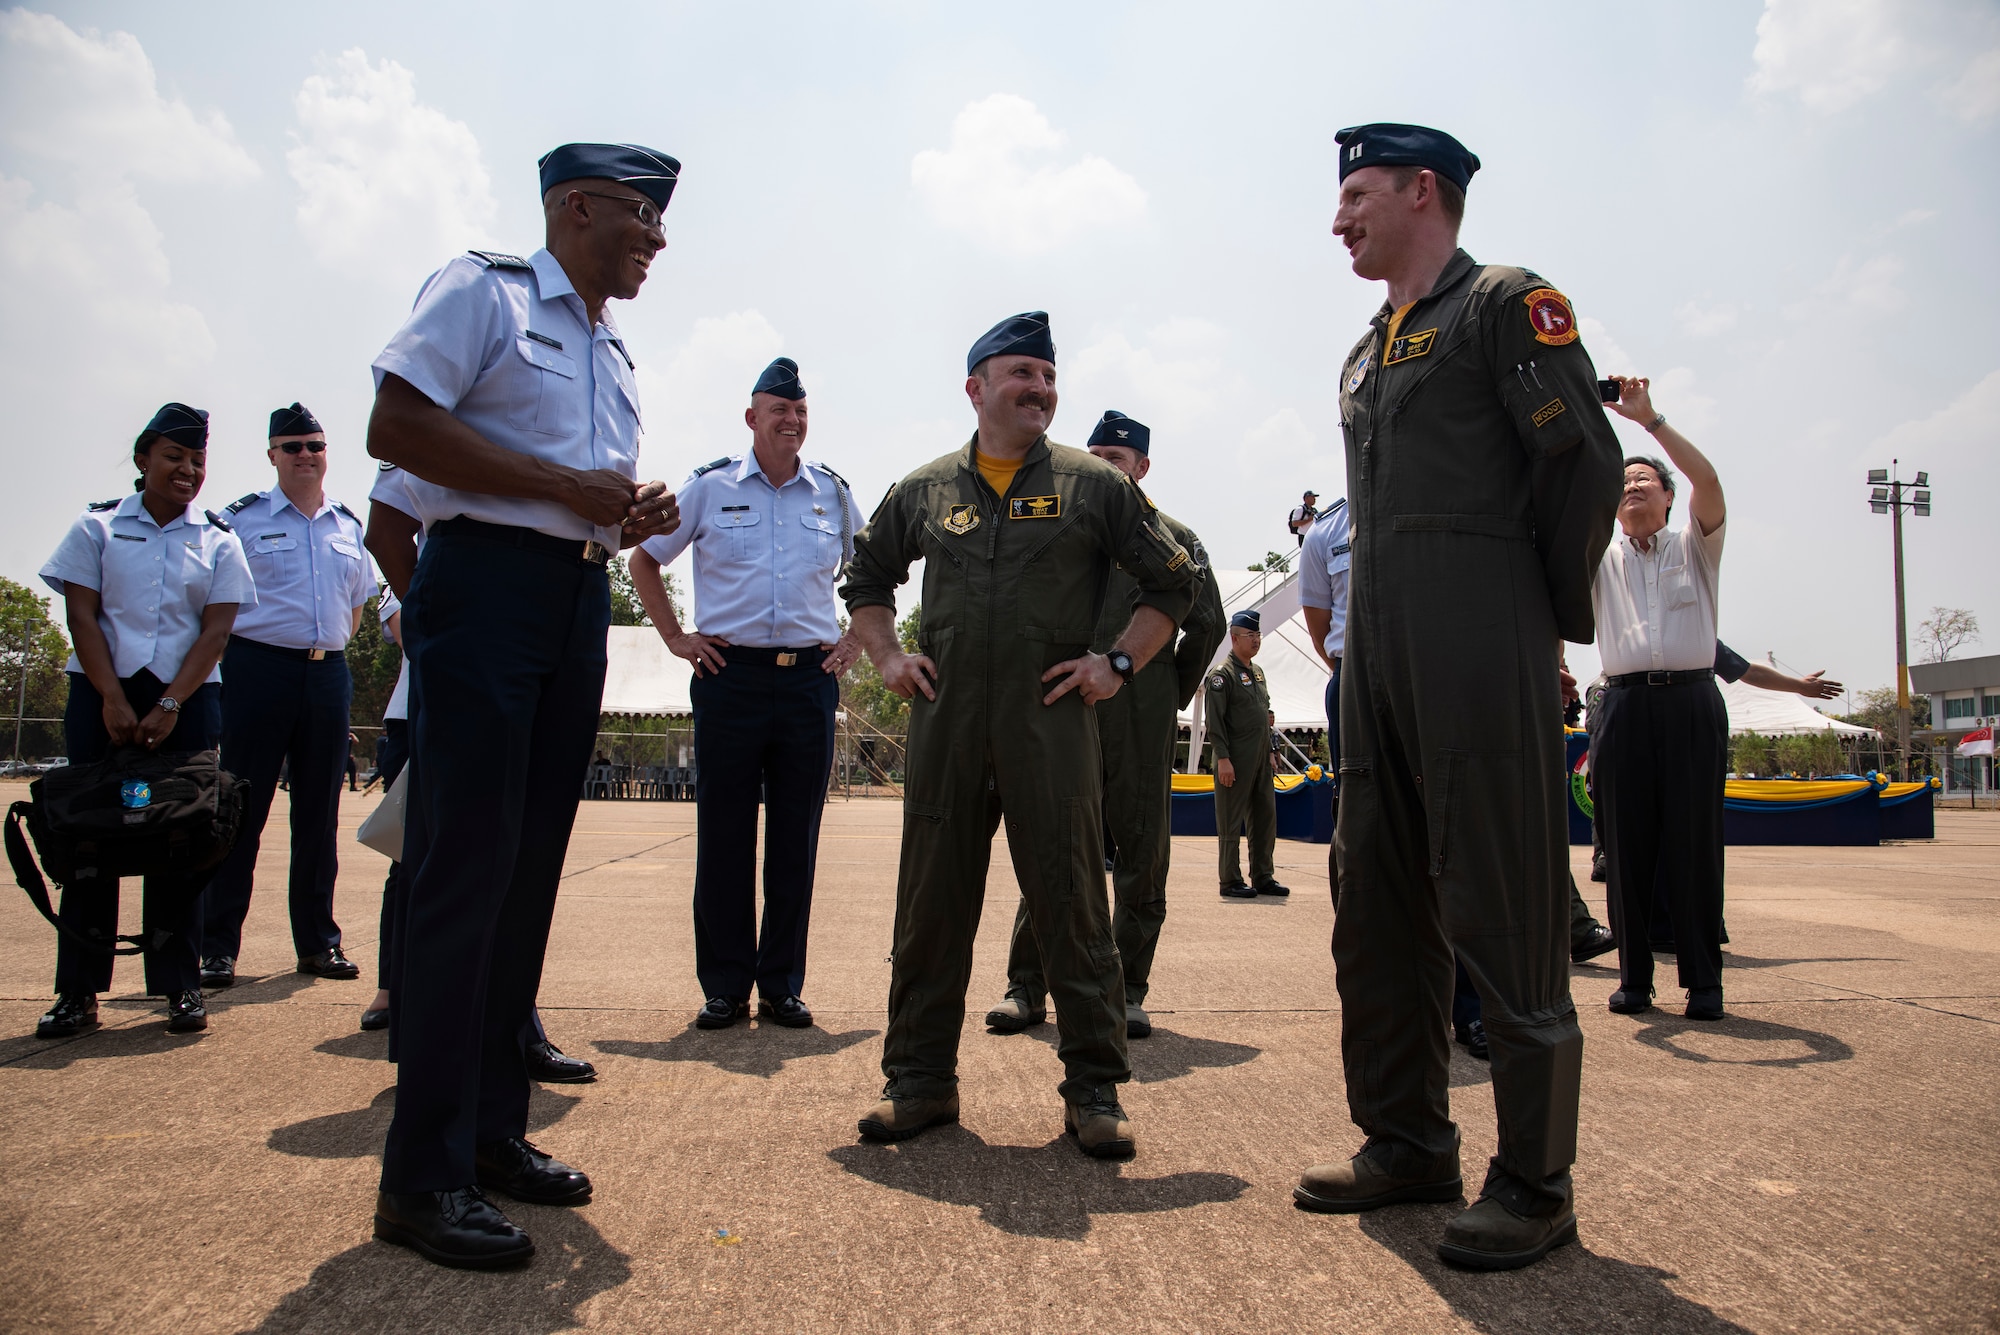 U.S. Air Force Gen. CQ Brown Jr., Pacific Air Forces commander, talks with Lt. Col. Matthew Kenkel, 14th Fighter Squadron commander, and Capt. Joe Boyle, 14th Fighter Squadron COPE Tiger 2019 project officer, following the closing ceremony for COPE Tiger 2019 at Korat Royal Thai Air Force Base, Thailand, March 22, 2019.